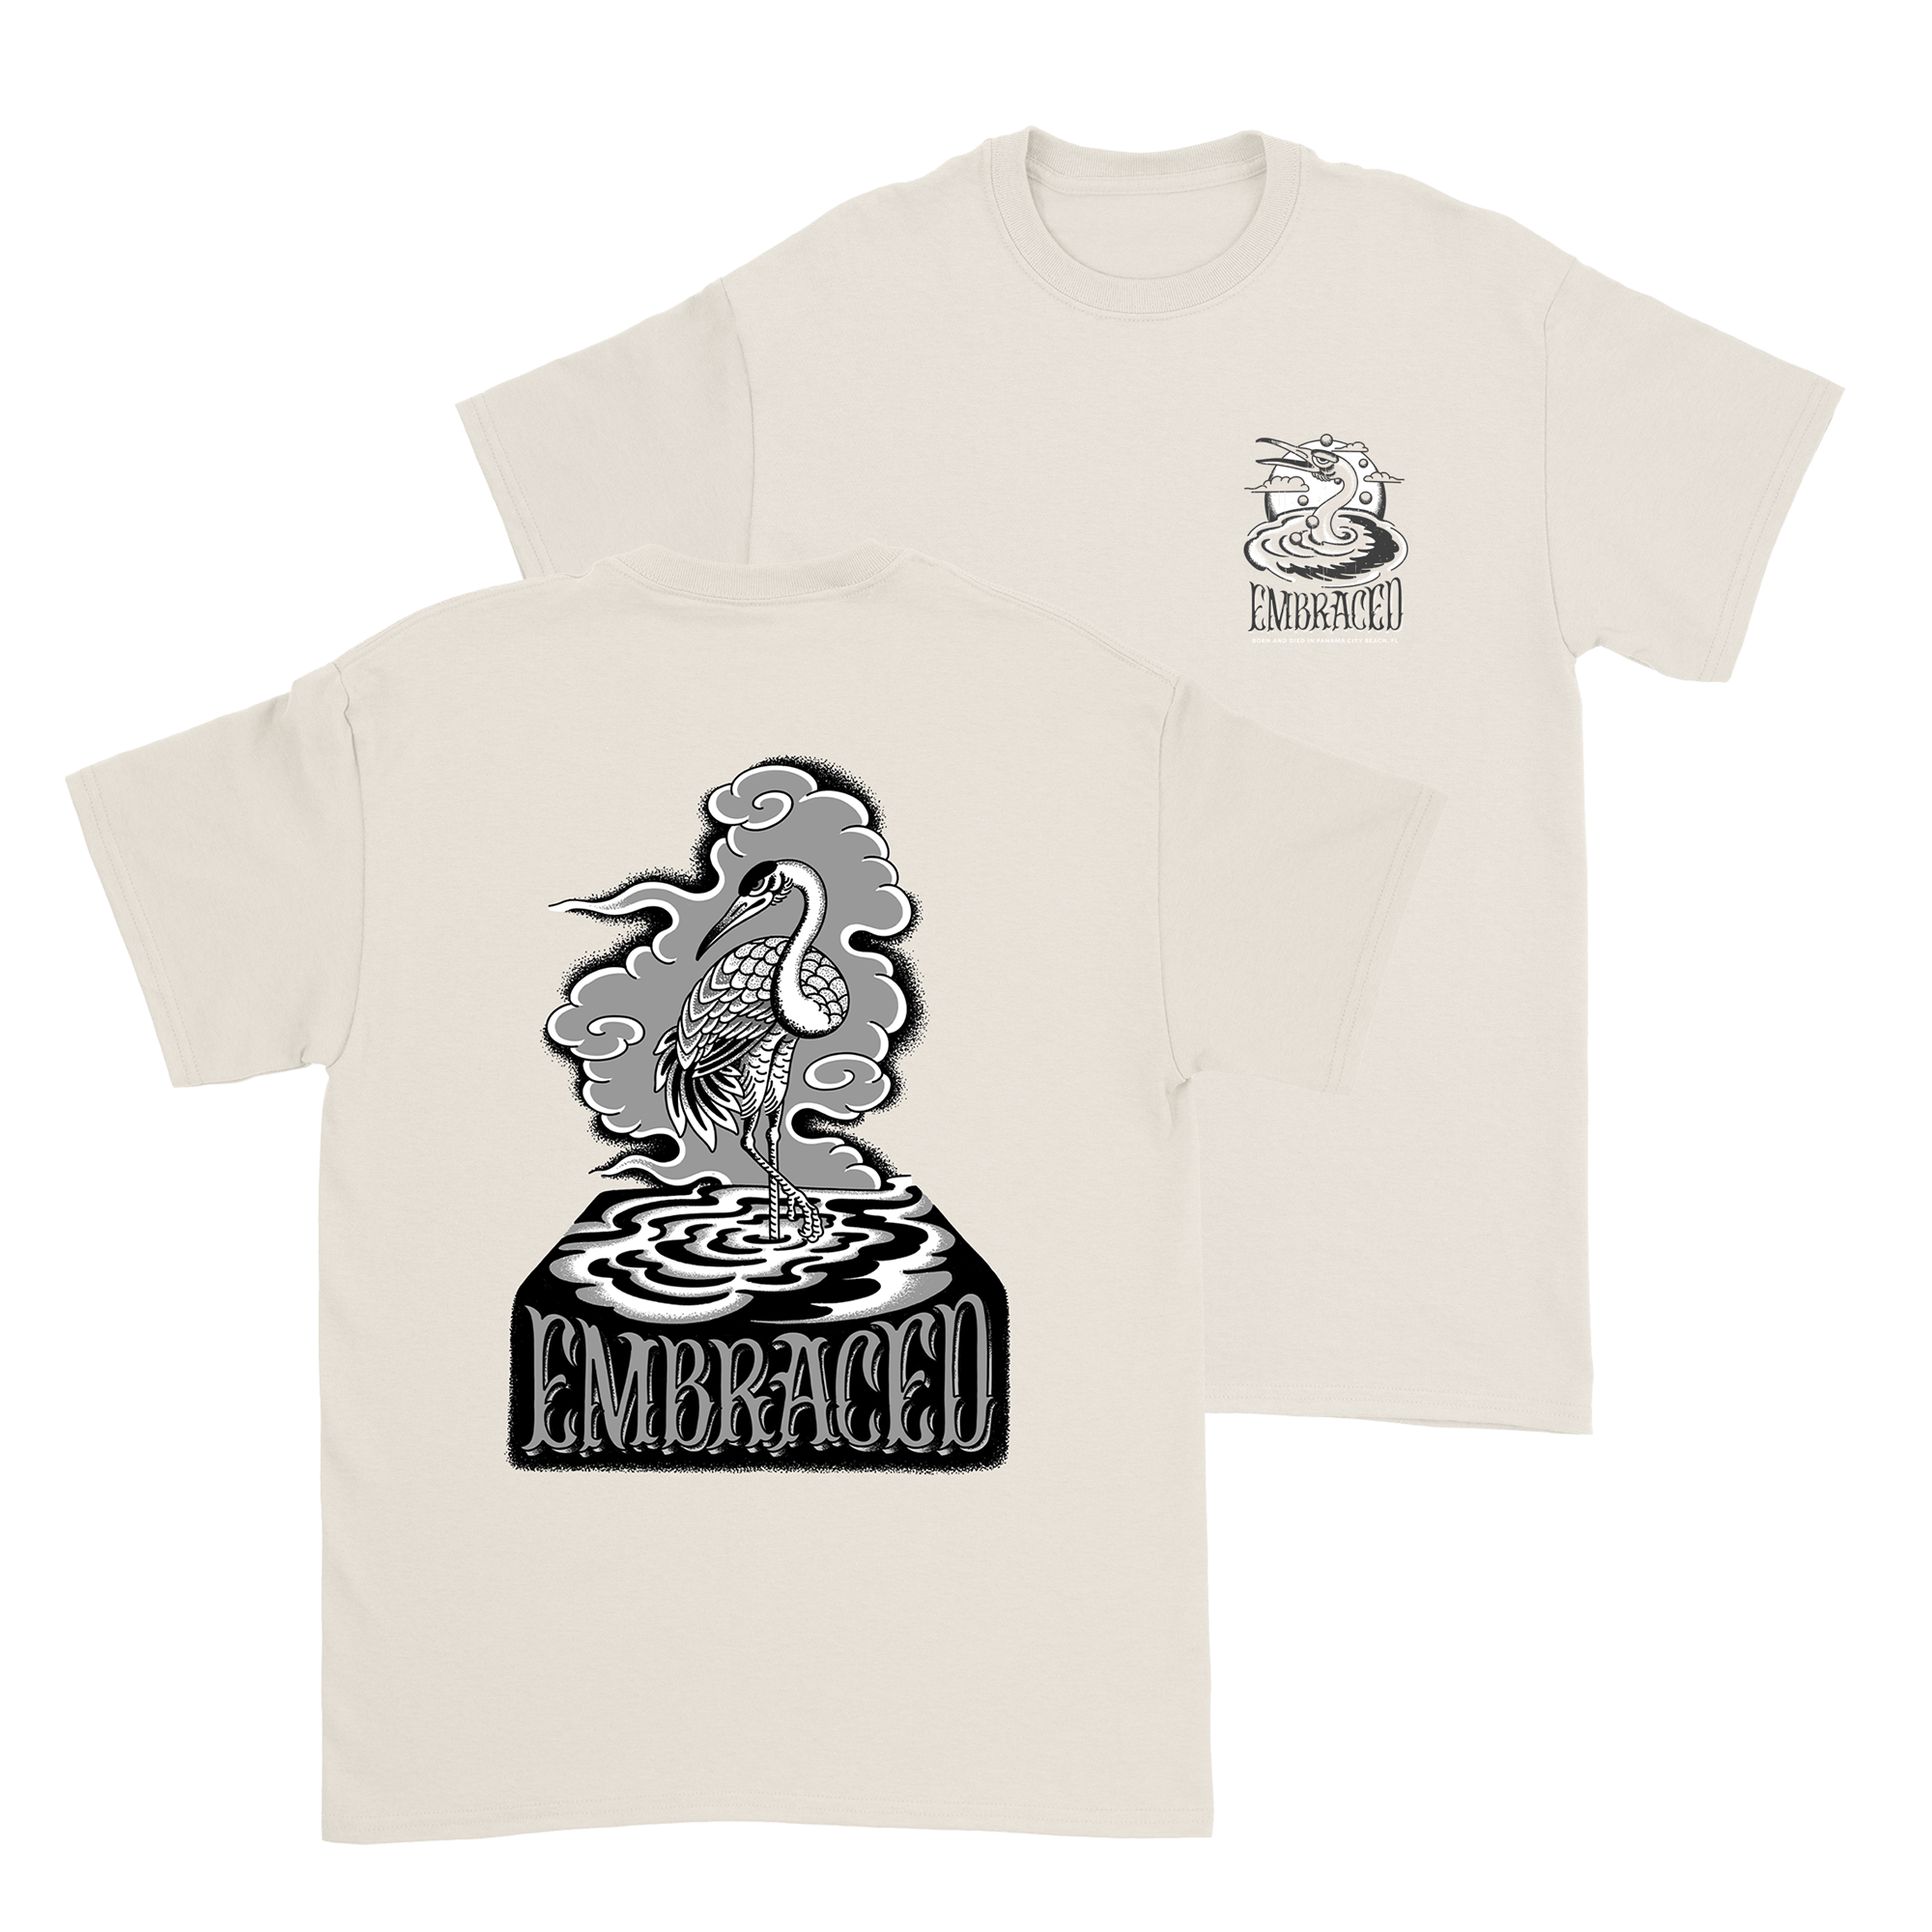 Embraced - Born and Died T-Shirt